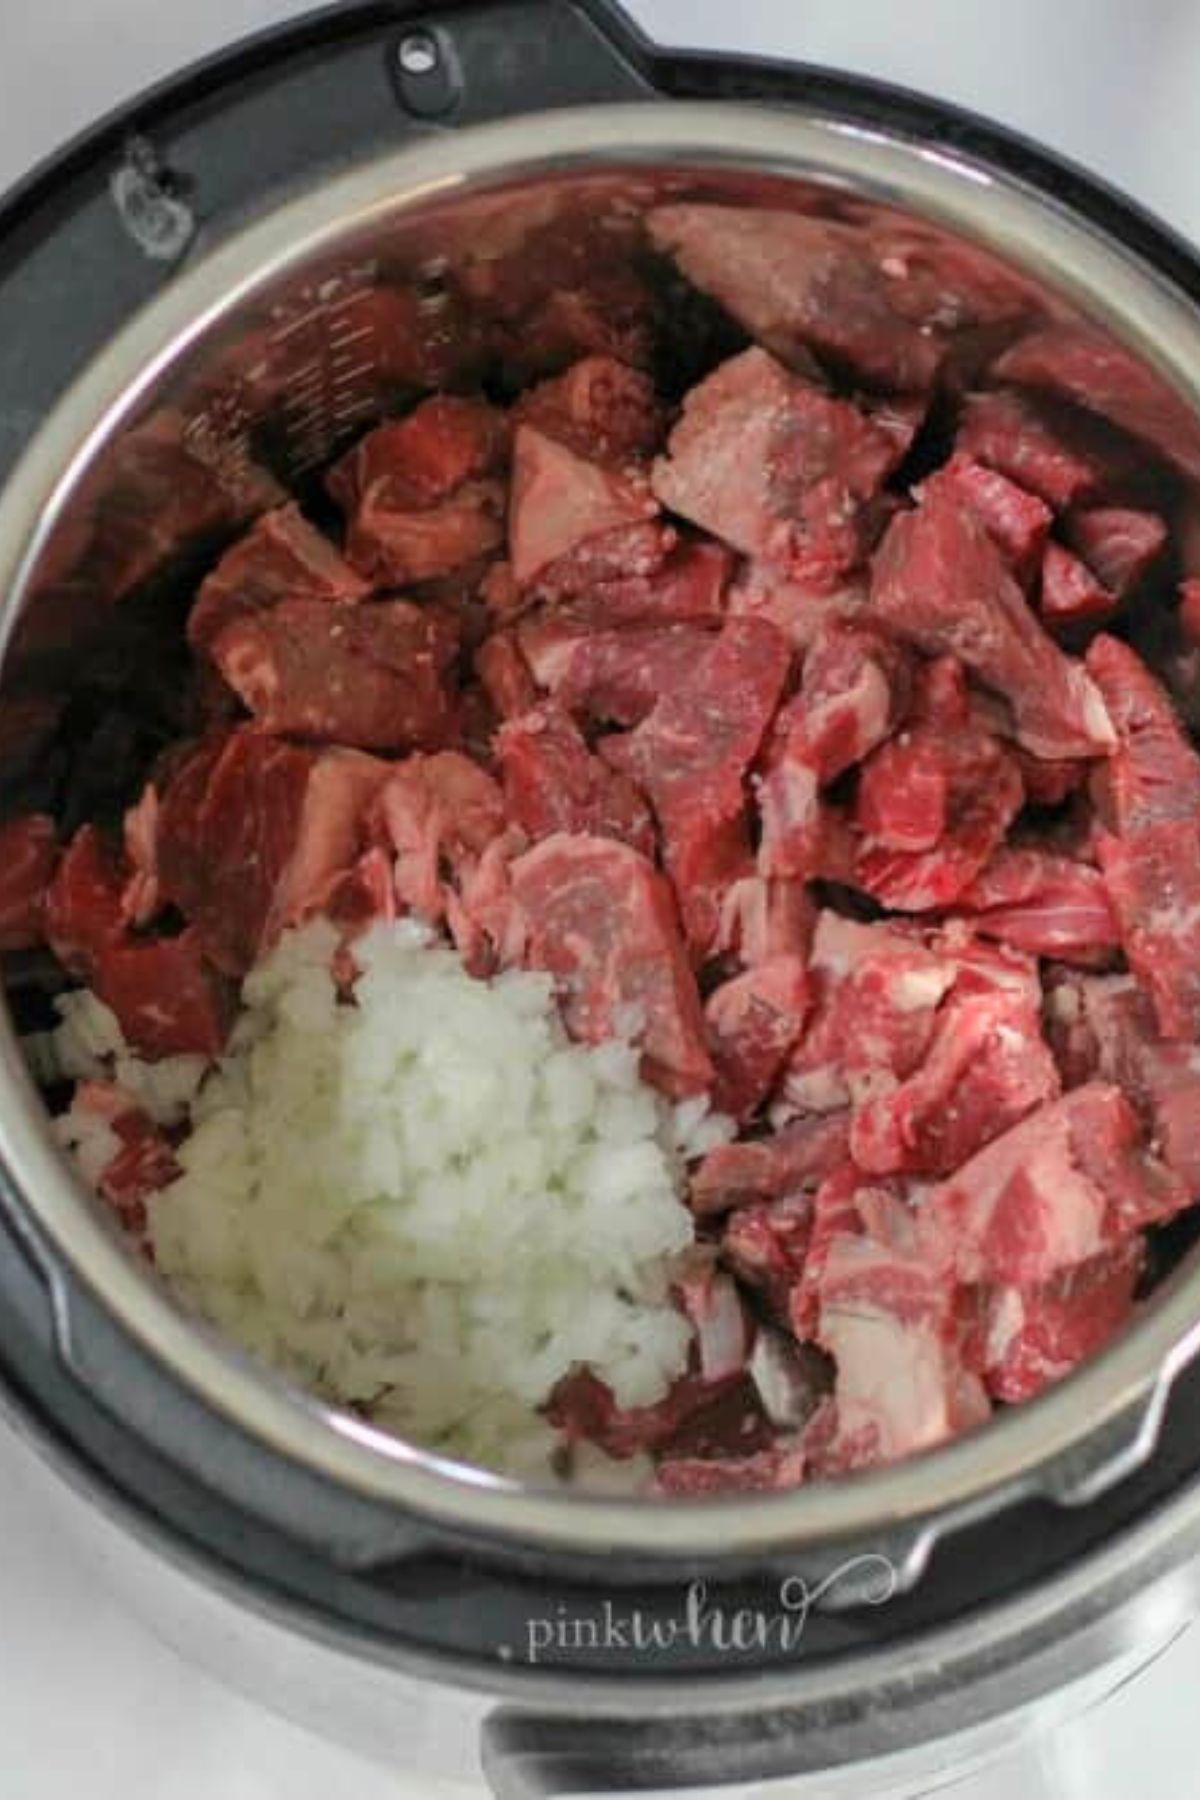 Uncooked beef tips with other ingredients in the instant pot, before cooking.